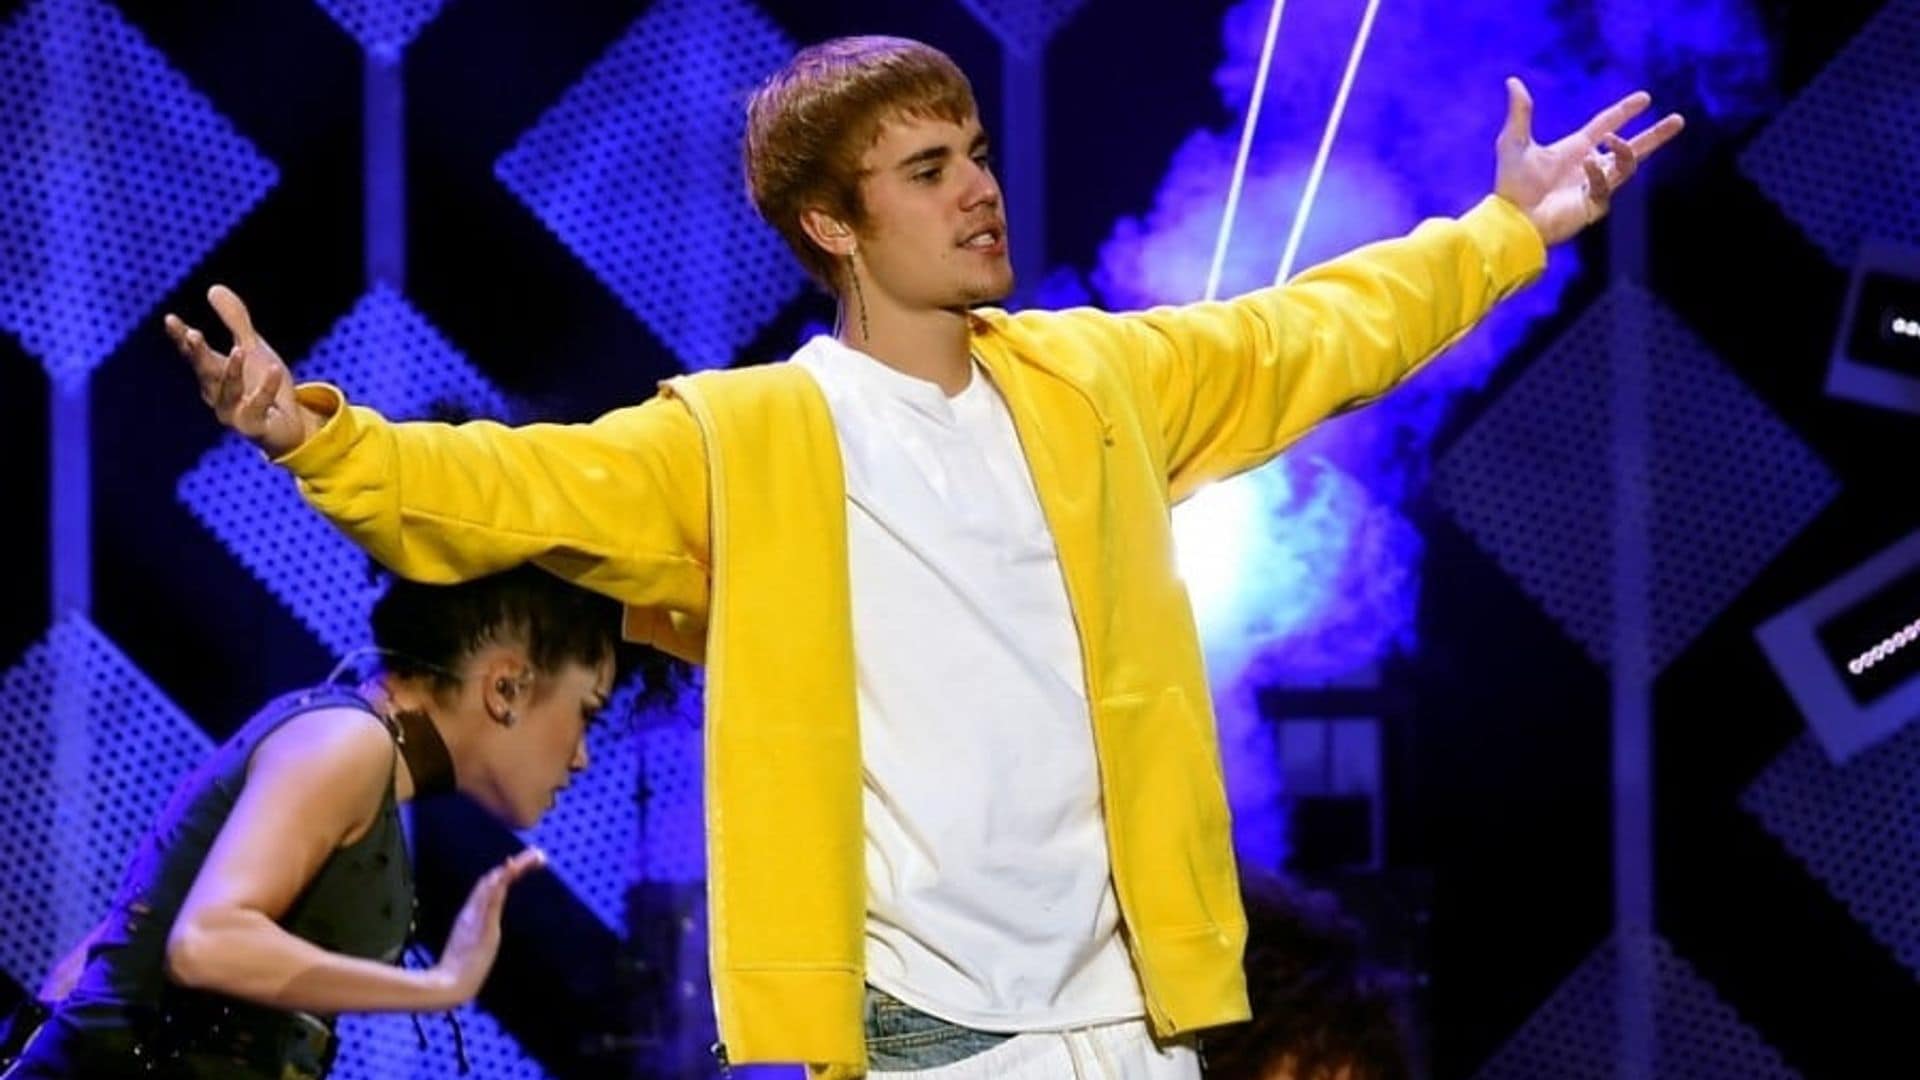 Justin Bieber onstage in December during 102.7 KIIS FM's Jingle Ball 2016 in L.A. The pop star returned to Instagram in February 2017.
Photo:Kevin Winter/Getty Images